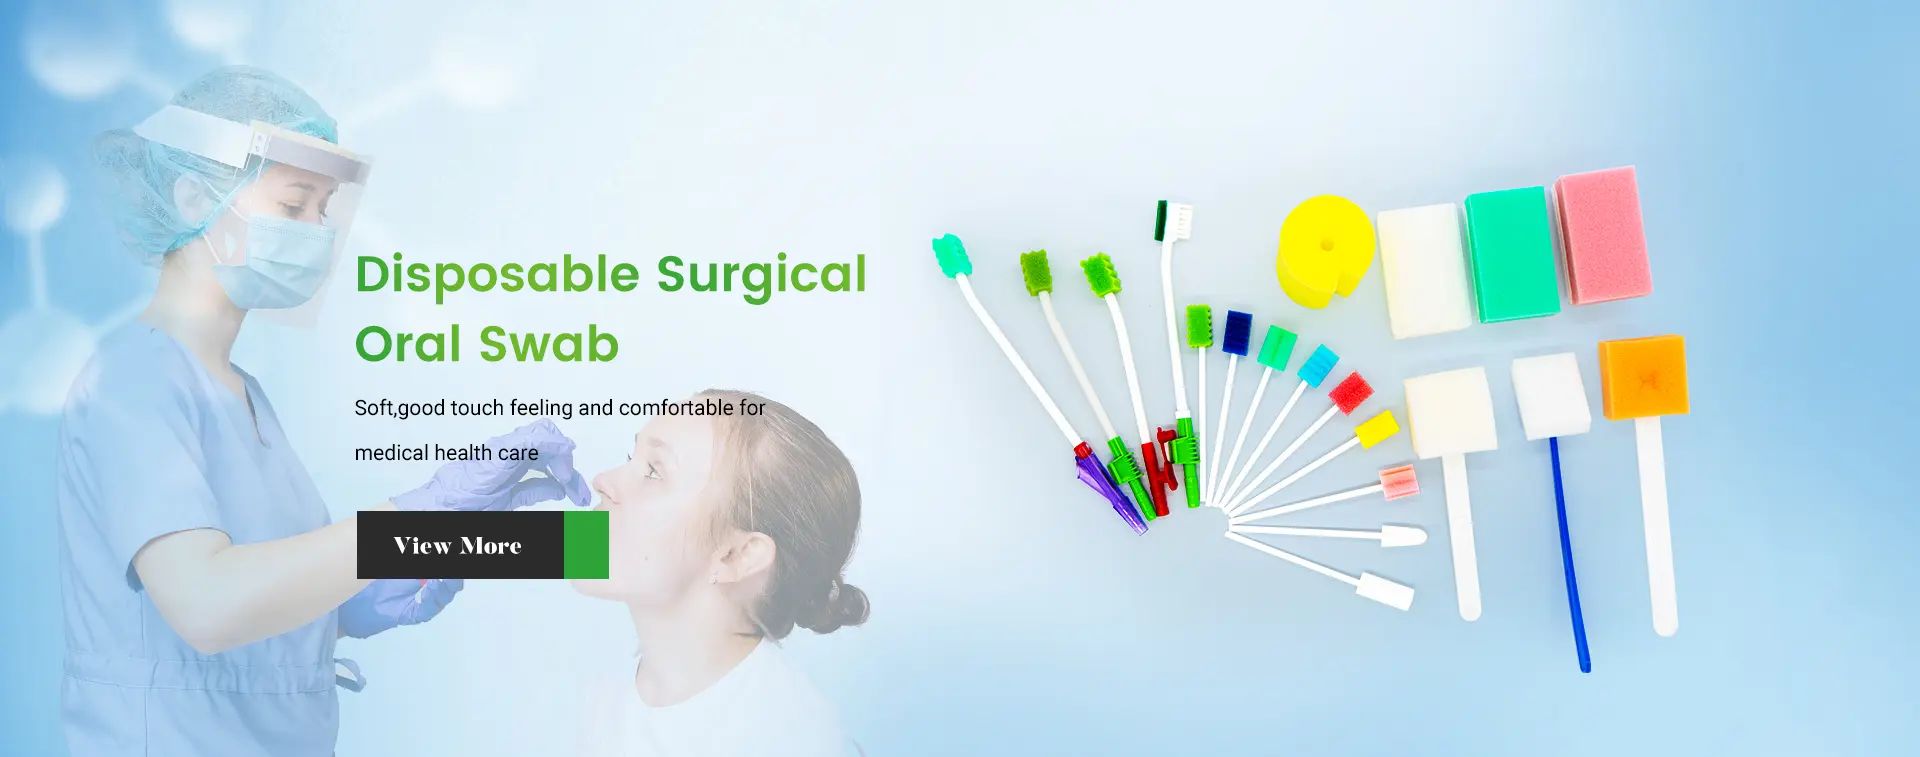 Disposable surgical Oral Swab